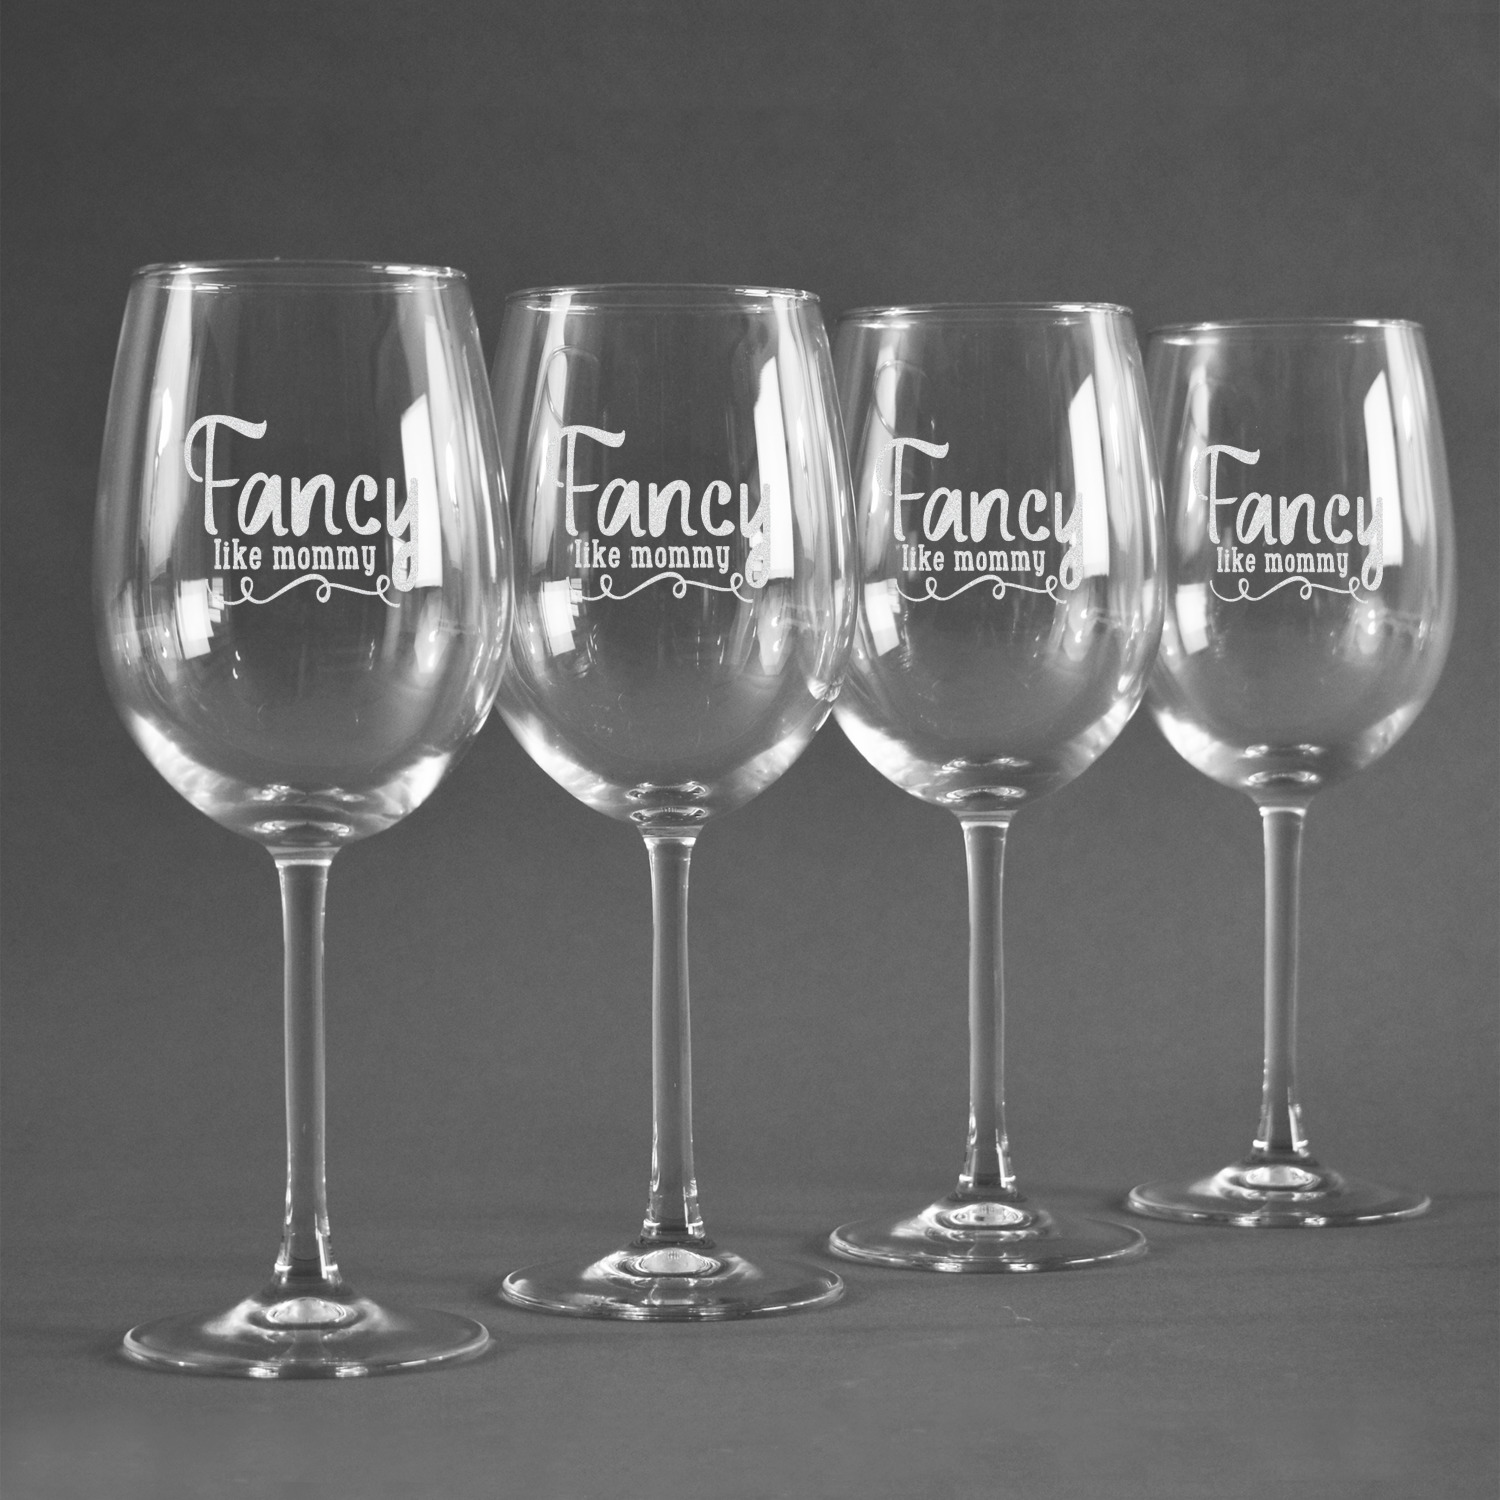 https://www.youcustomizeit.com/common/MAKE/1038289/Mom-Quotes-and-Sayings-Personalized-Wine-Glasses-Set-of-4-2.jpg?lm=1682545448